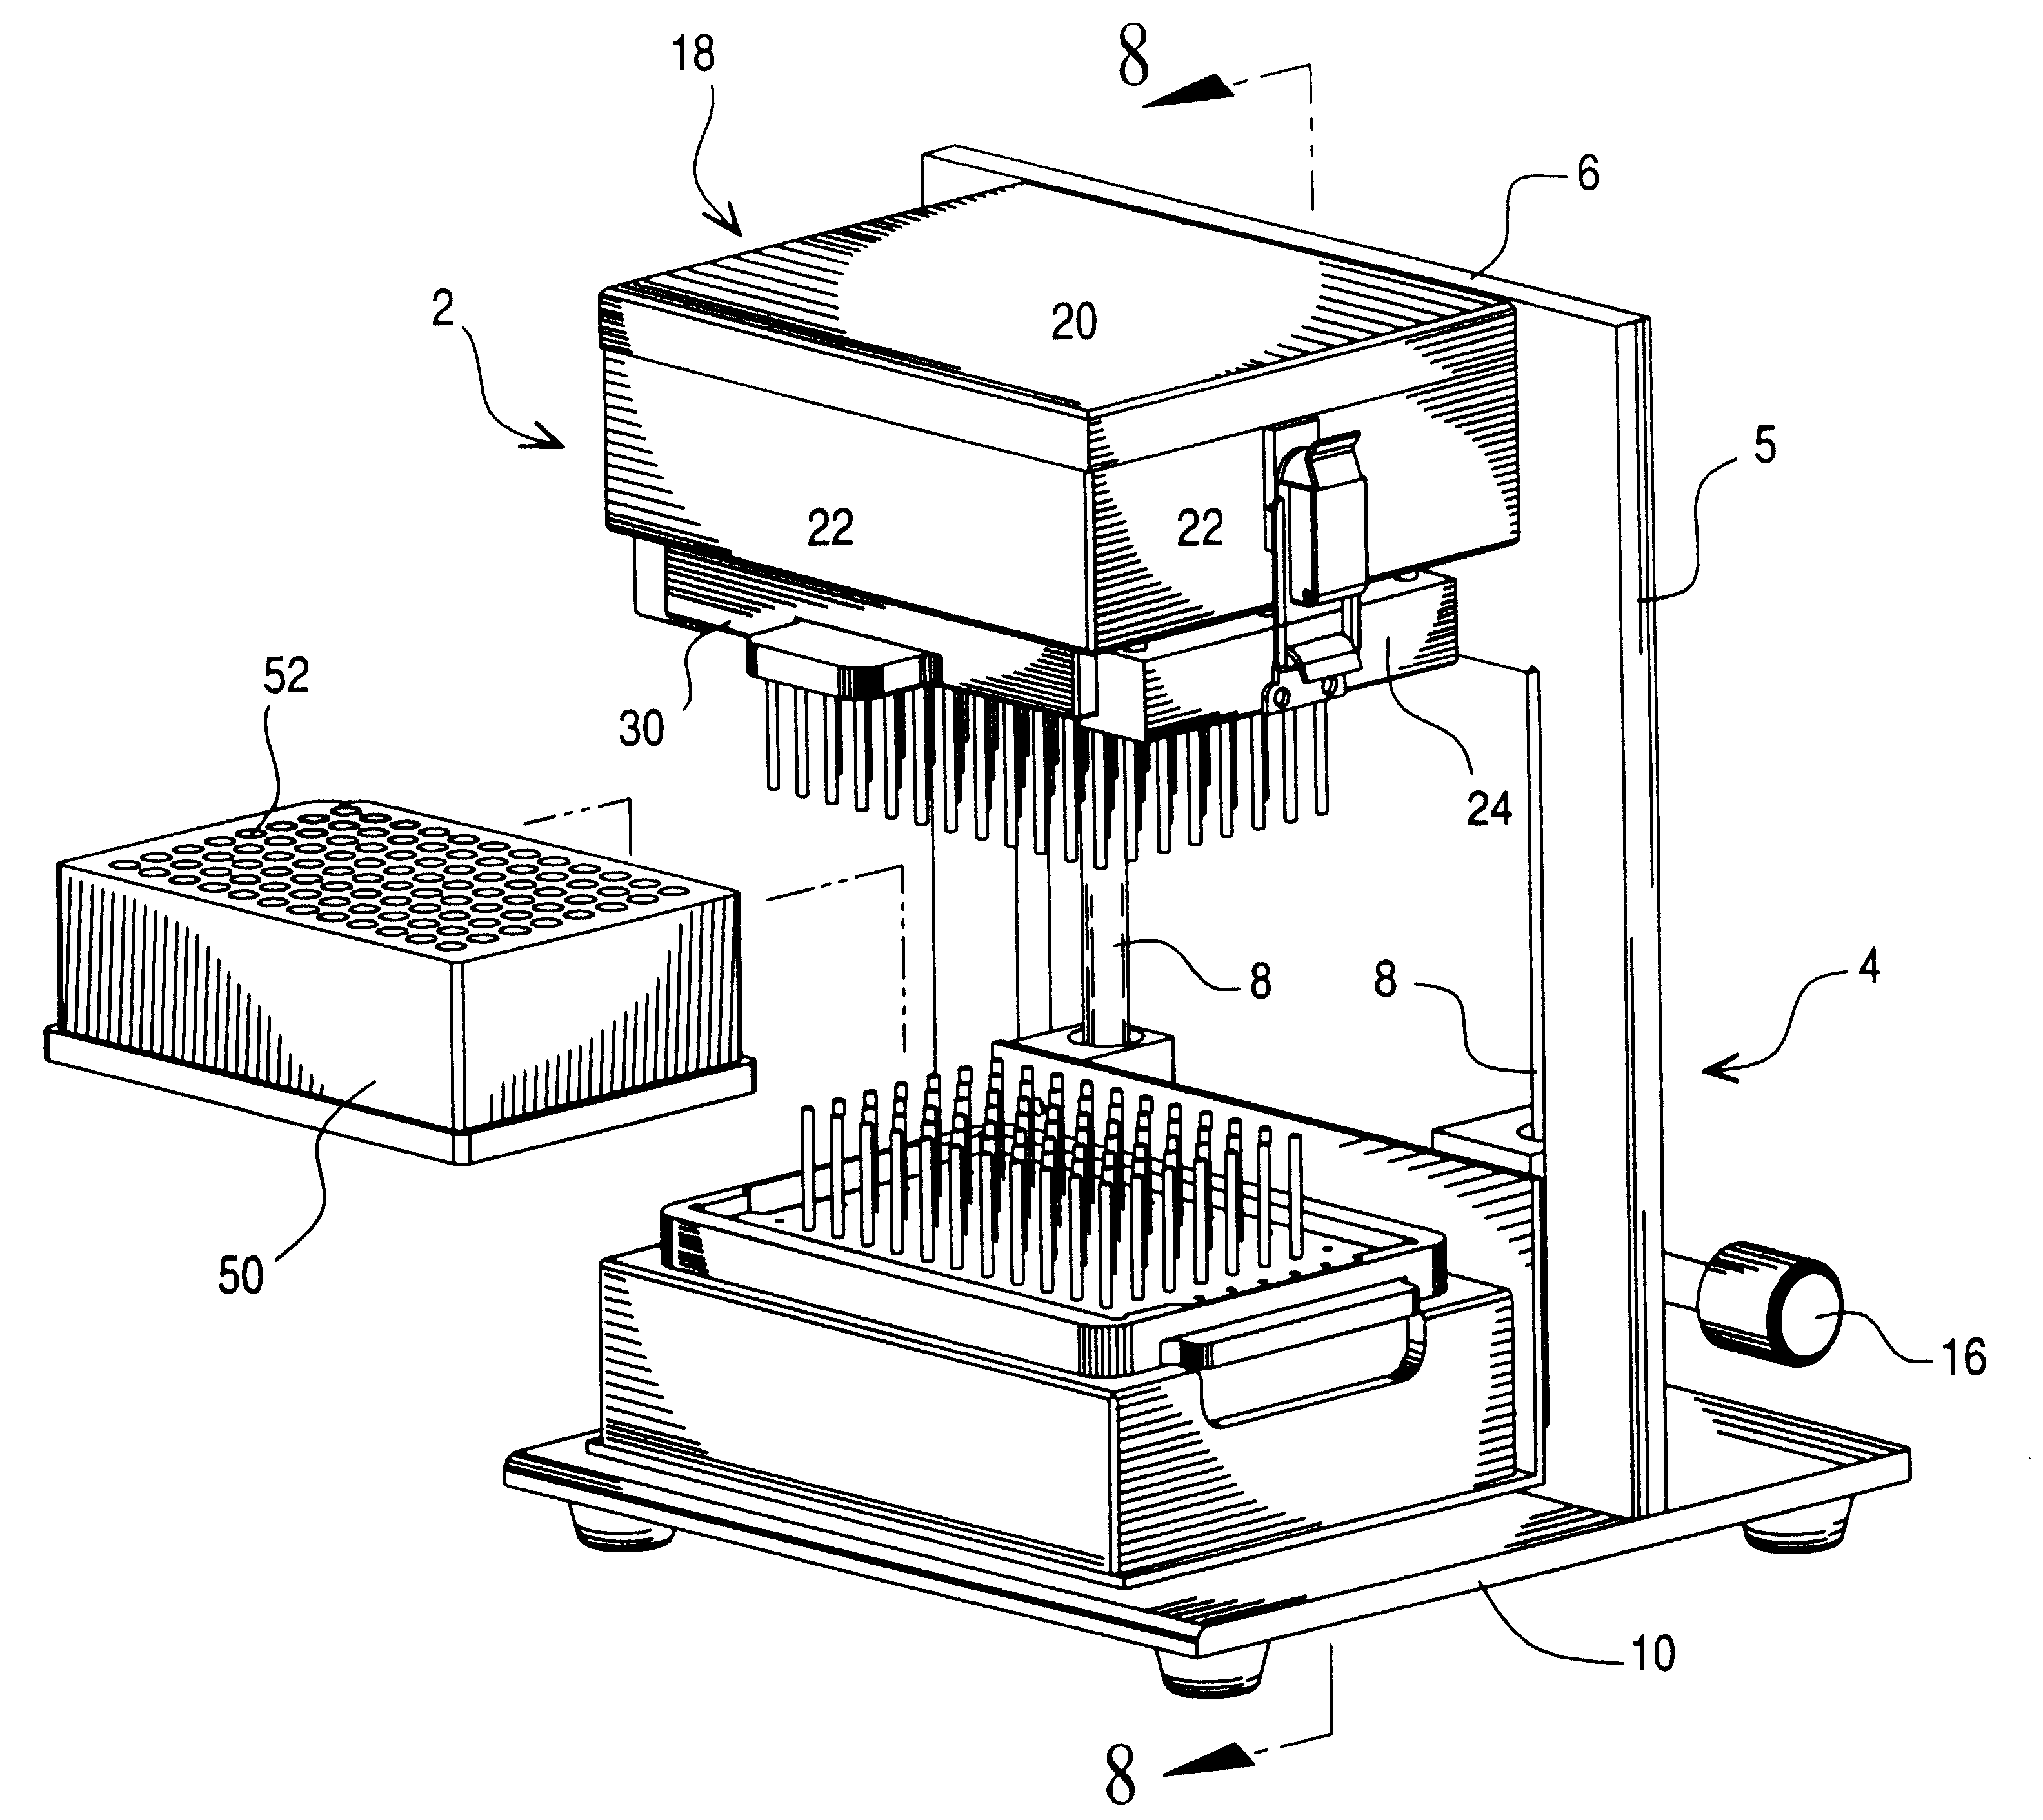 Solid phase evaporator device